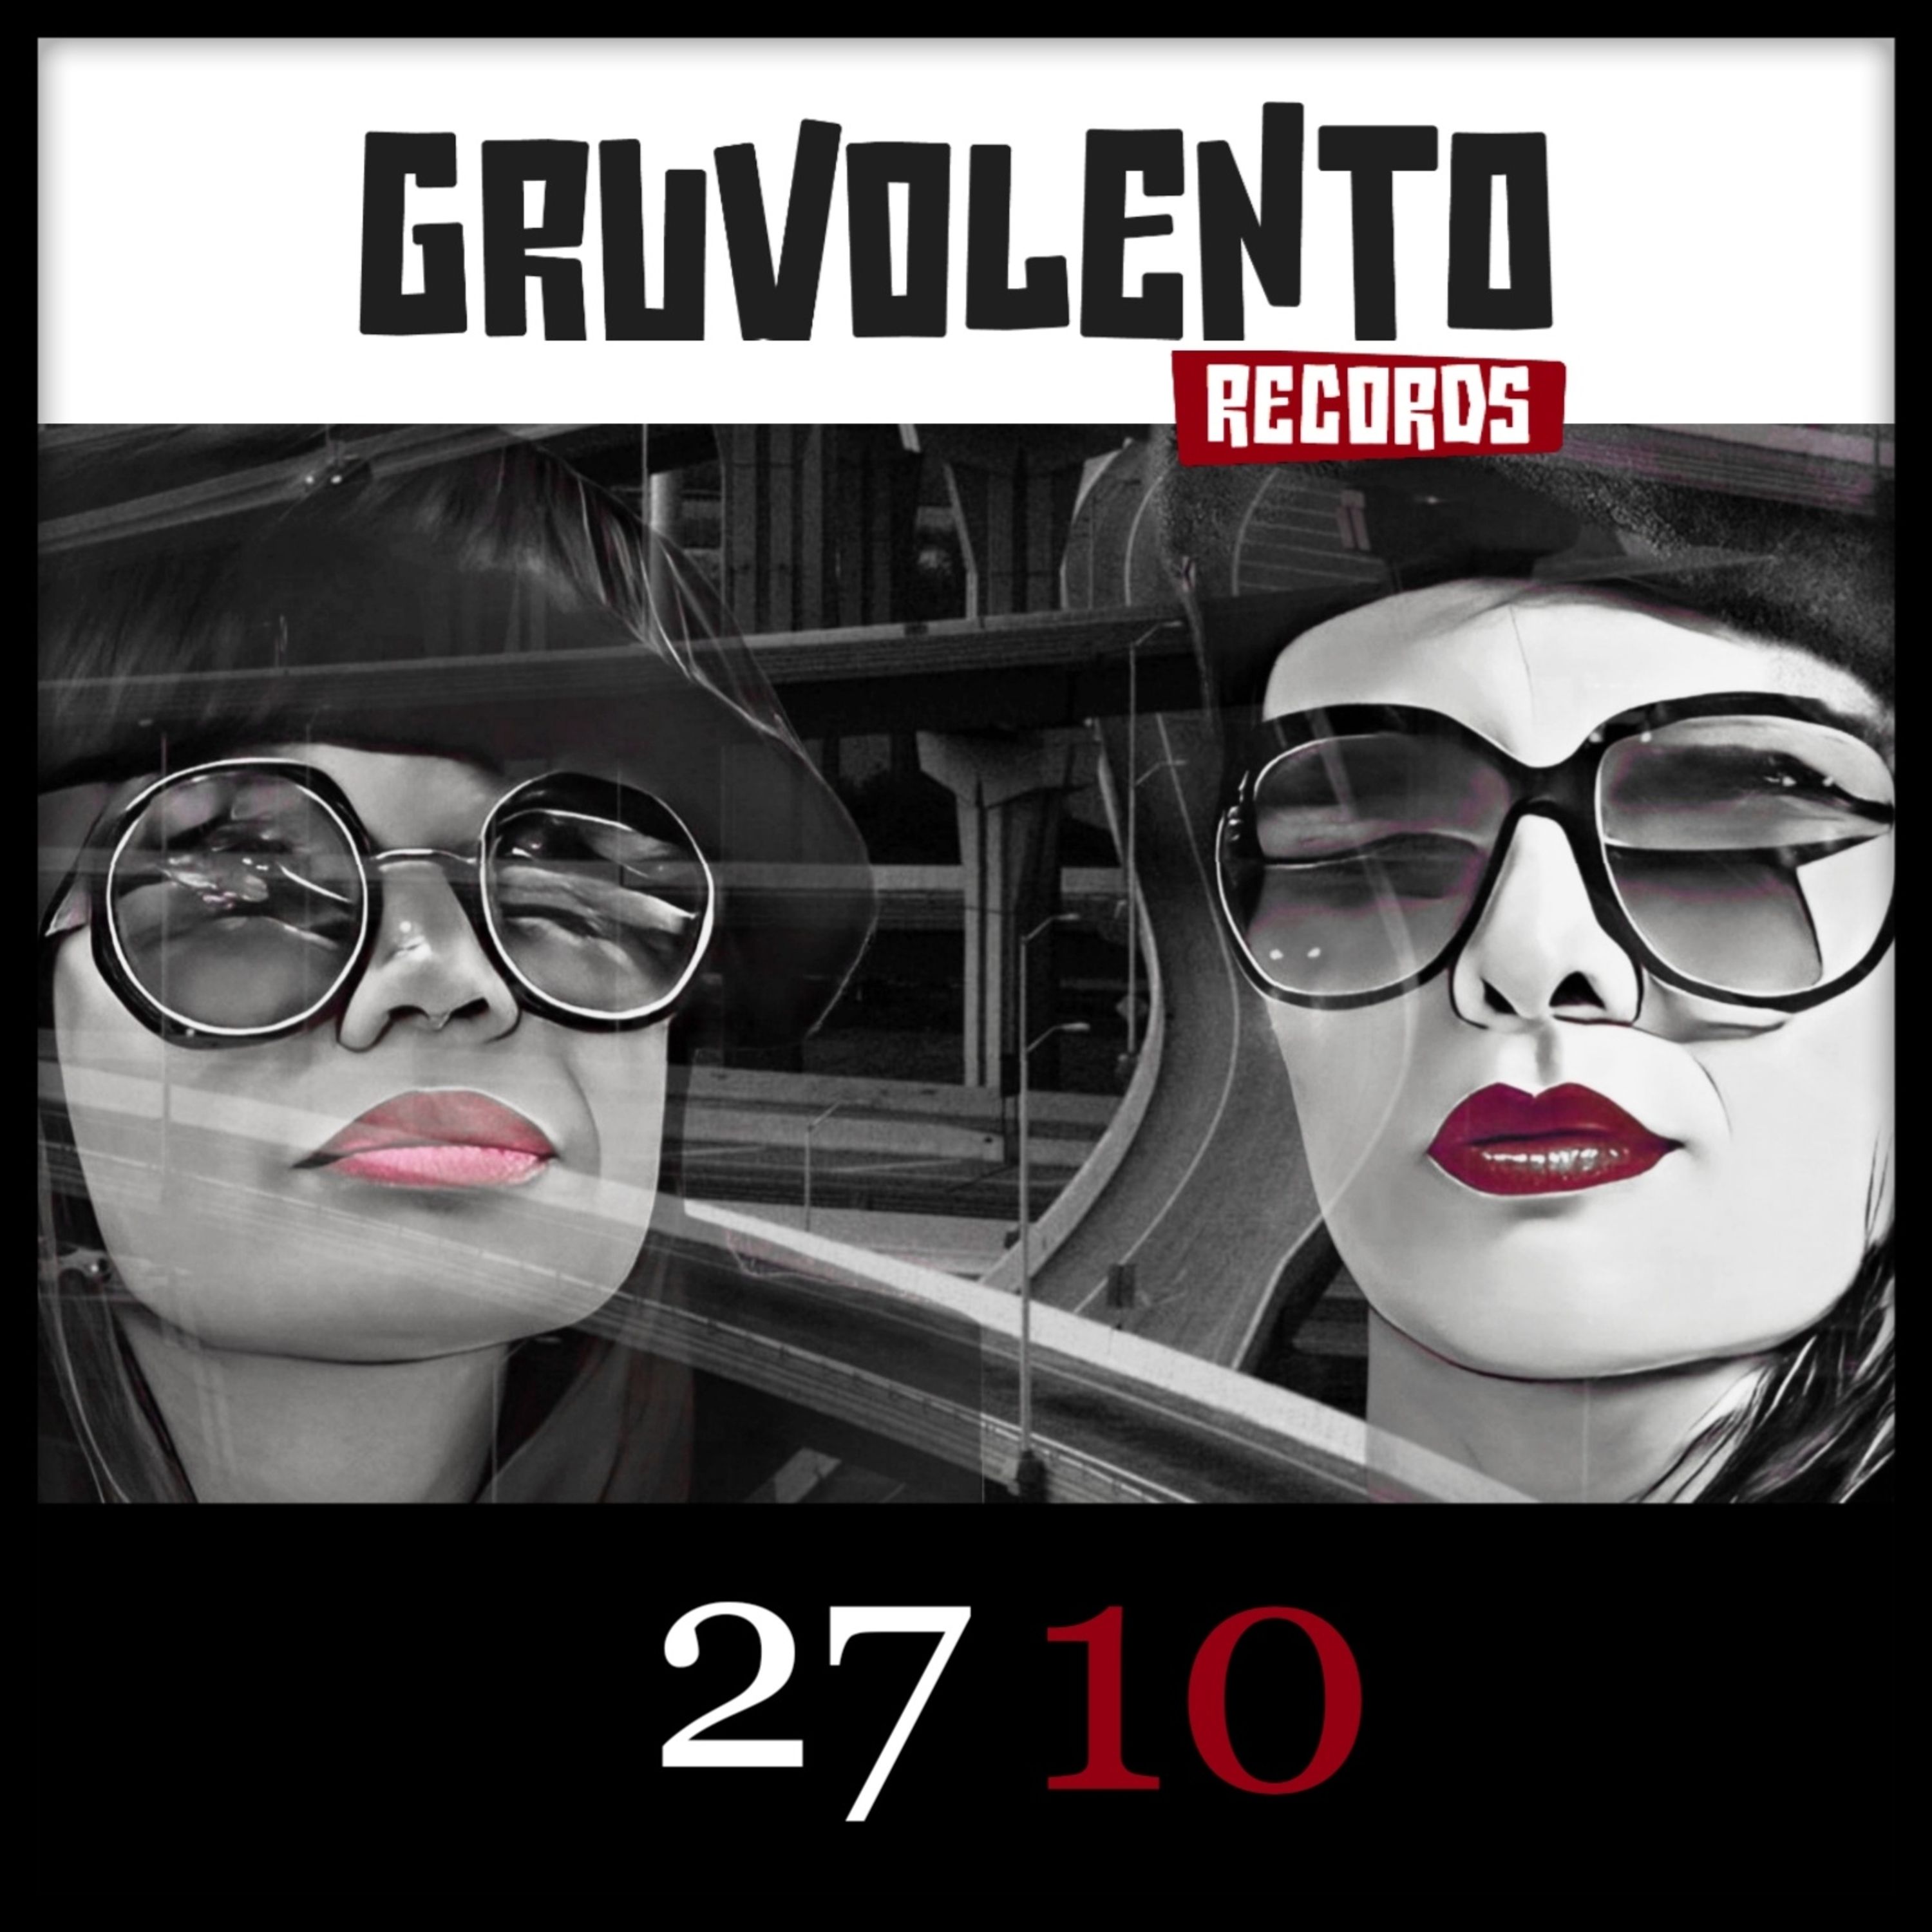 Art for 2710 by Gruvolento Records